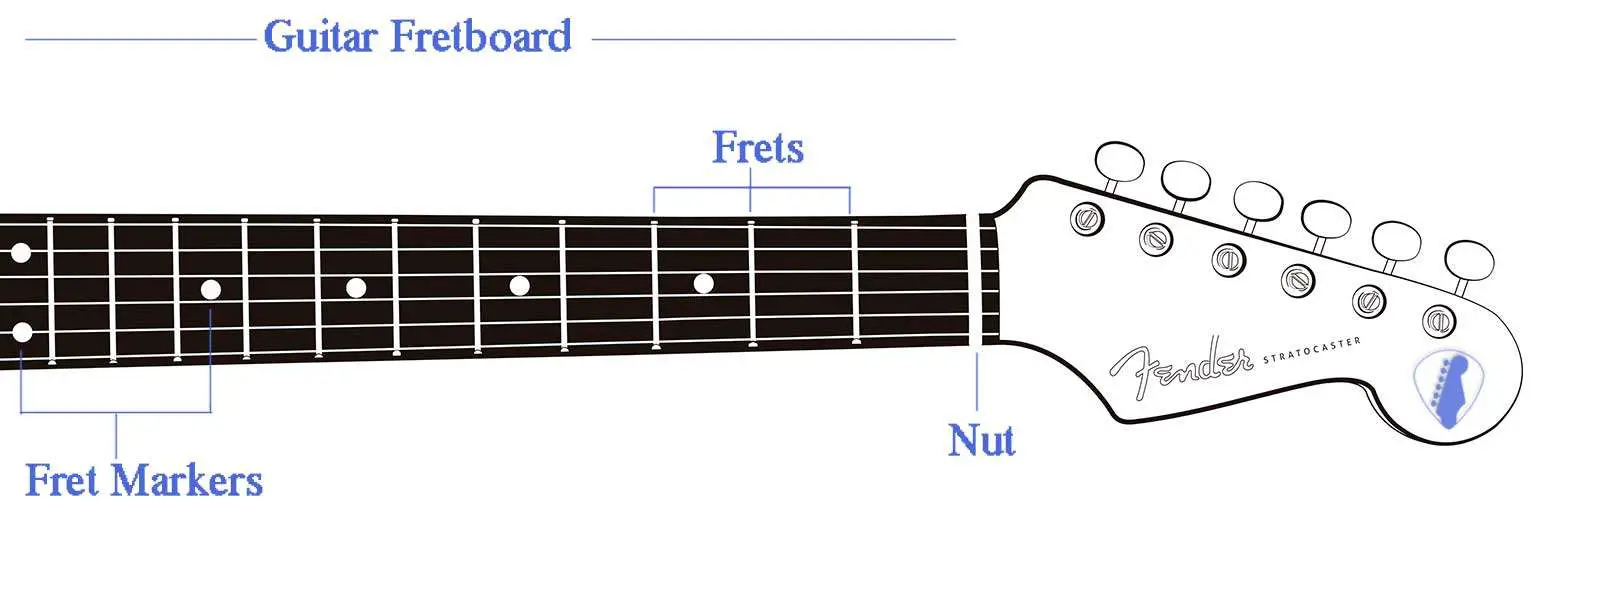 electric guitar bodies, truss rod, string vibrations, tone controls, volume and tone controls, anatomy of a guitar